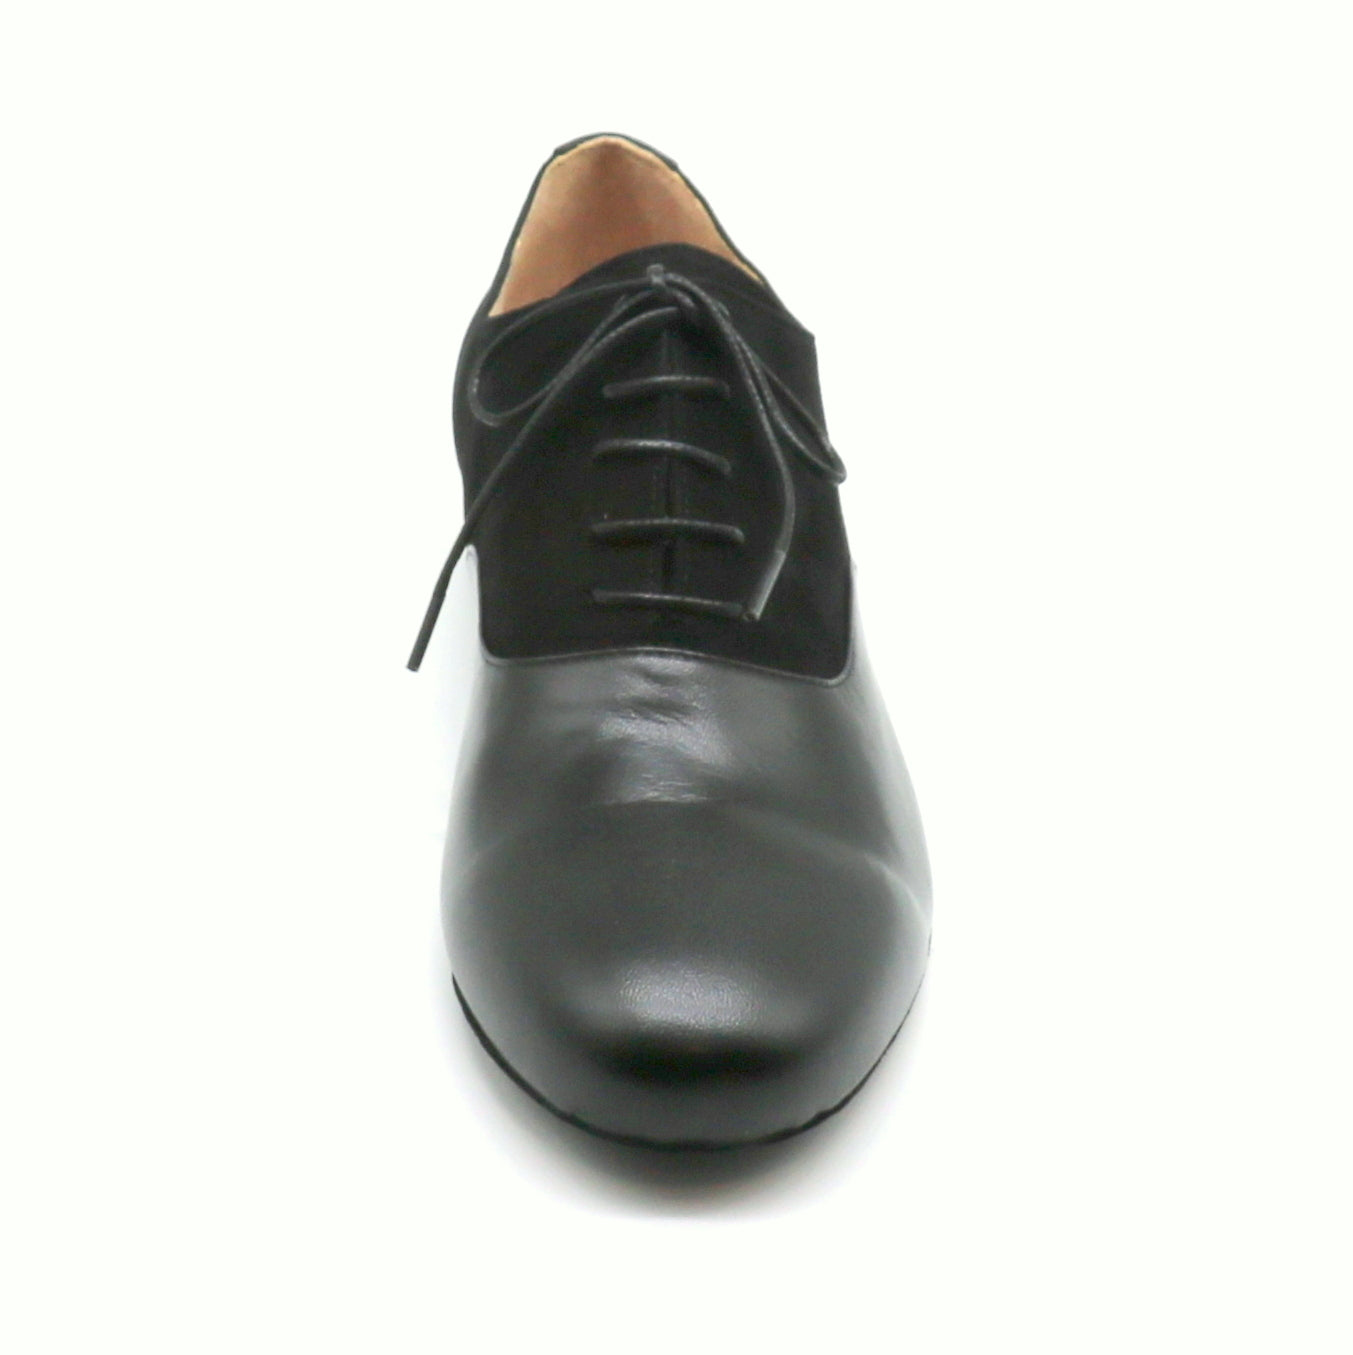 Tamango smooth black leather contrast suede dance sole